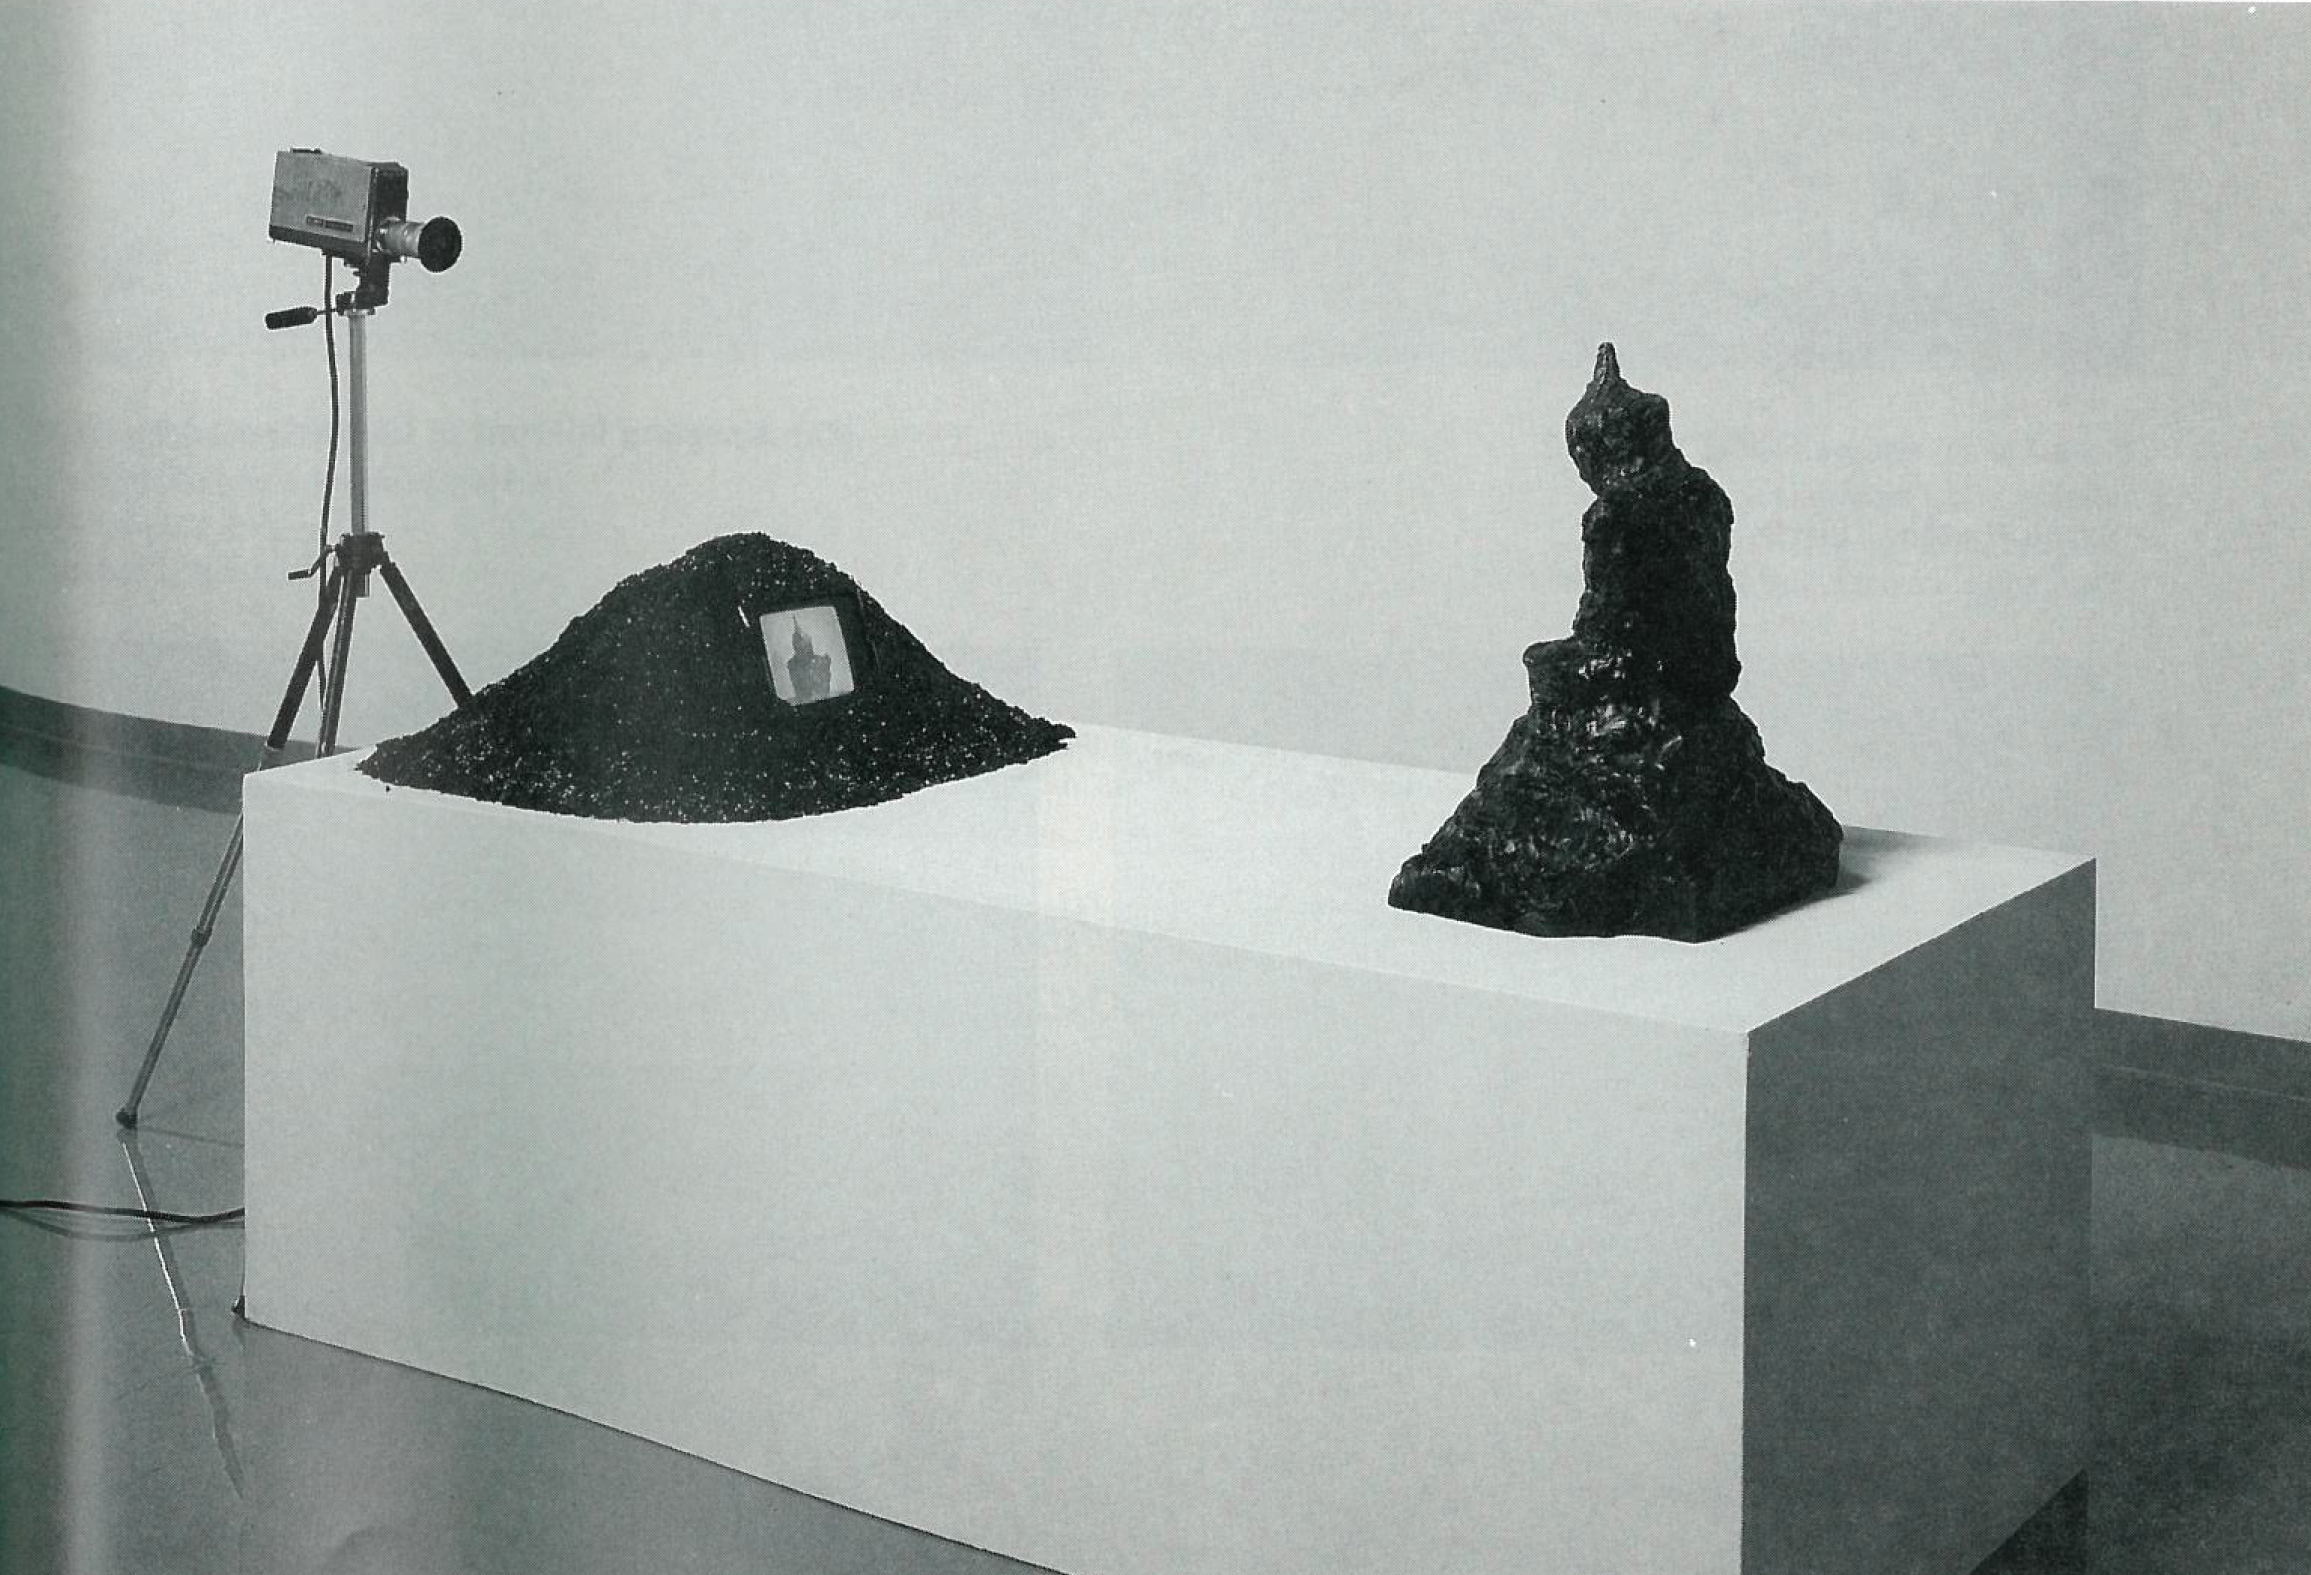 Whitney Buddha Complex, Nam June Paik, 1981-1985. Whitney Museum, New York City. Video installation with sculptures.